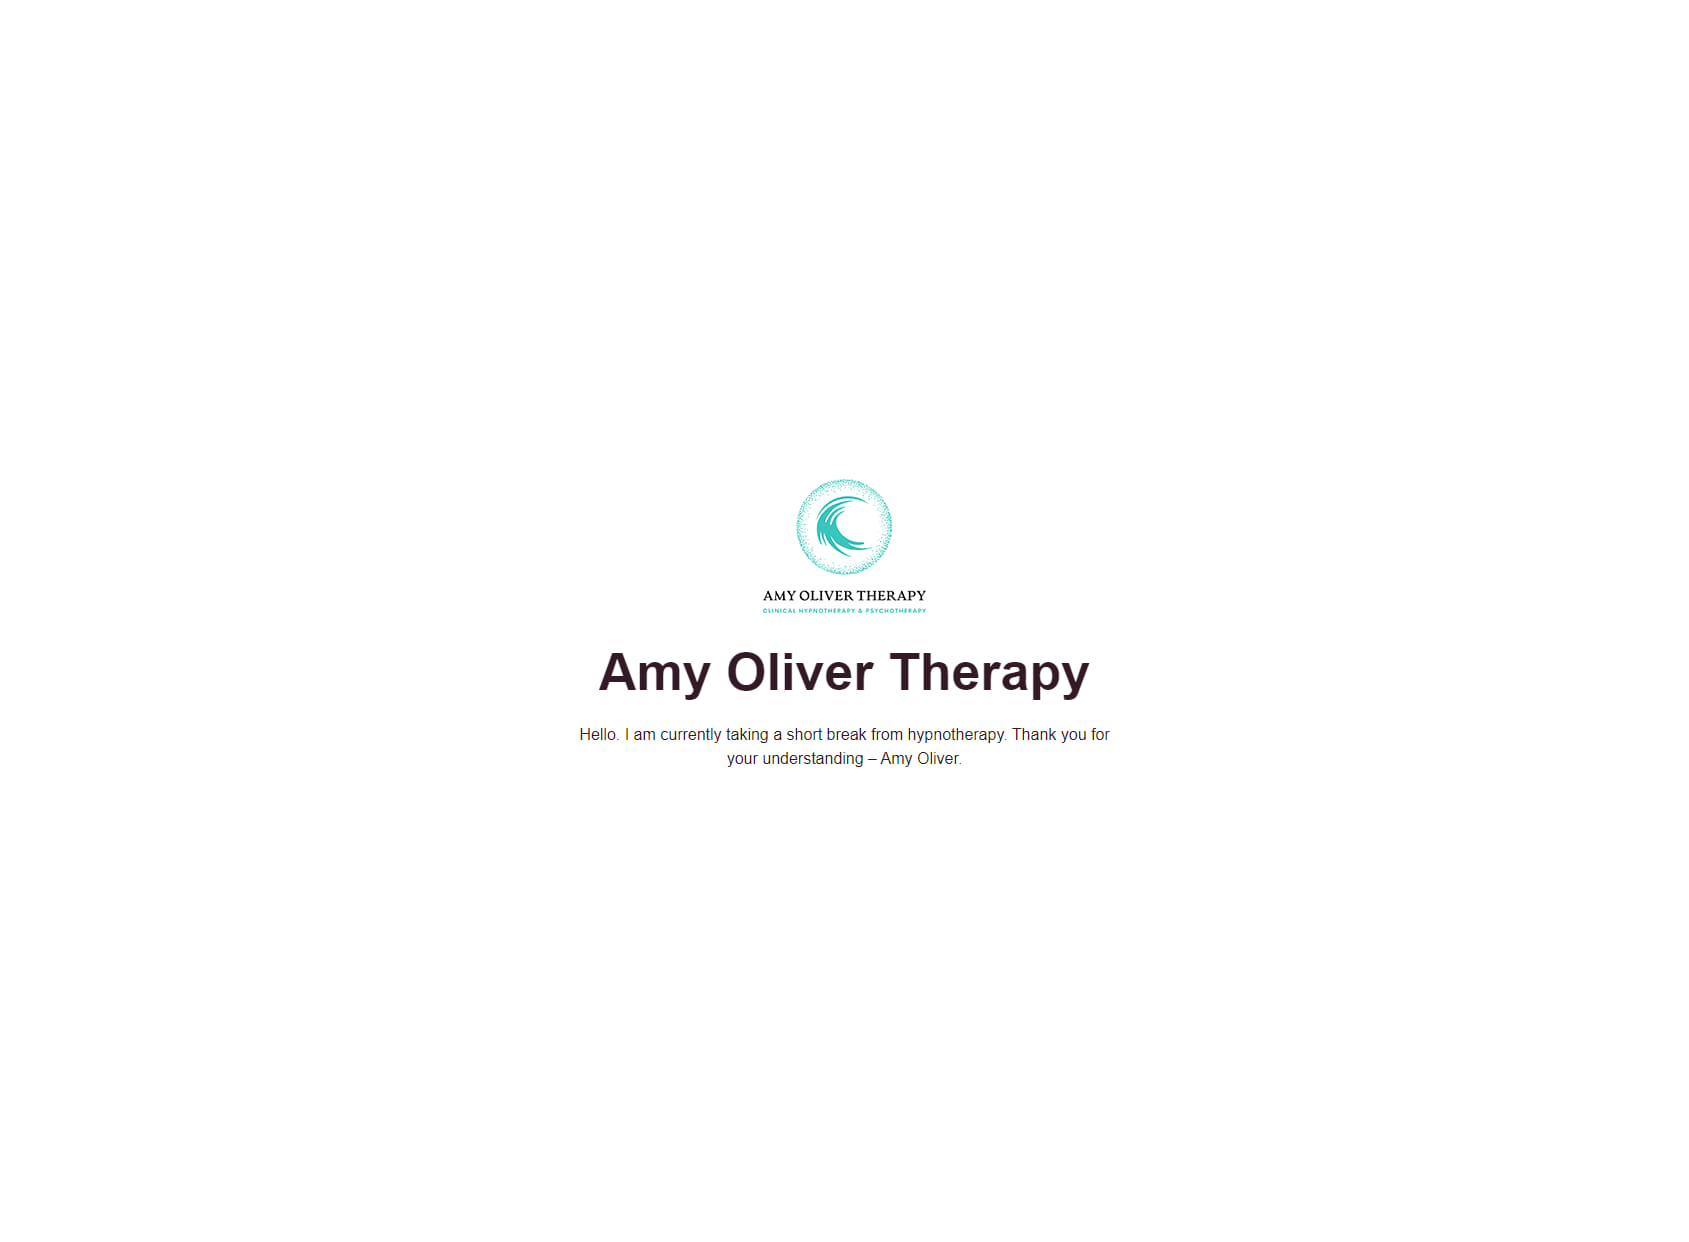 Amy Oliver Therapy